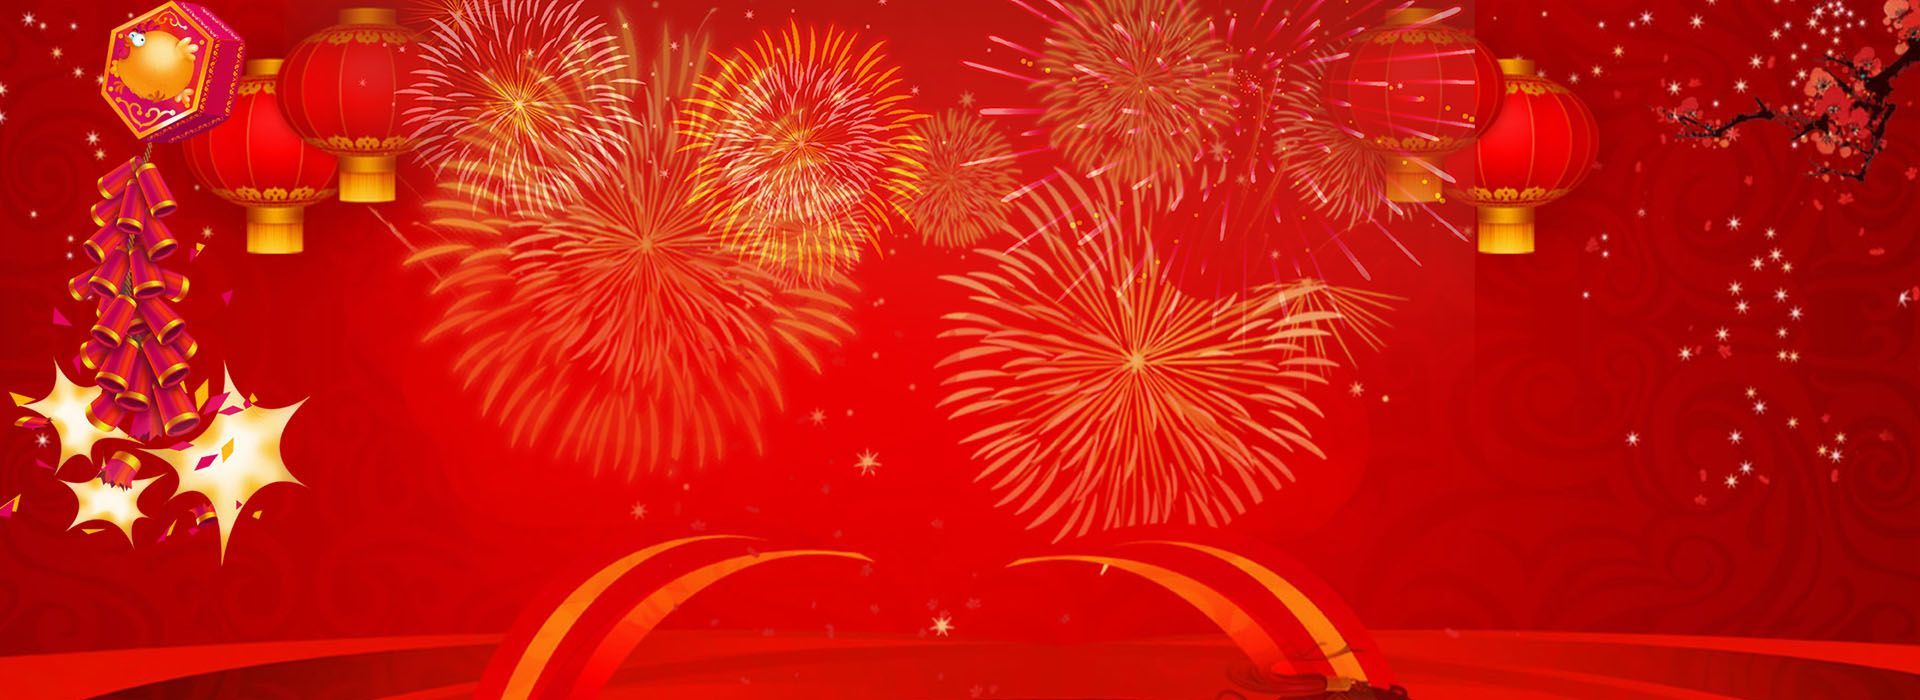 Free download Happy New Year Red Background backroud in 2019 Happy new year [1920x700] for your Desktop, Mobile & Tablet. Explore Explosive Background. Explosive Background